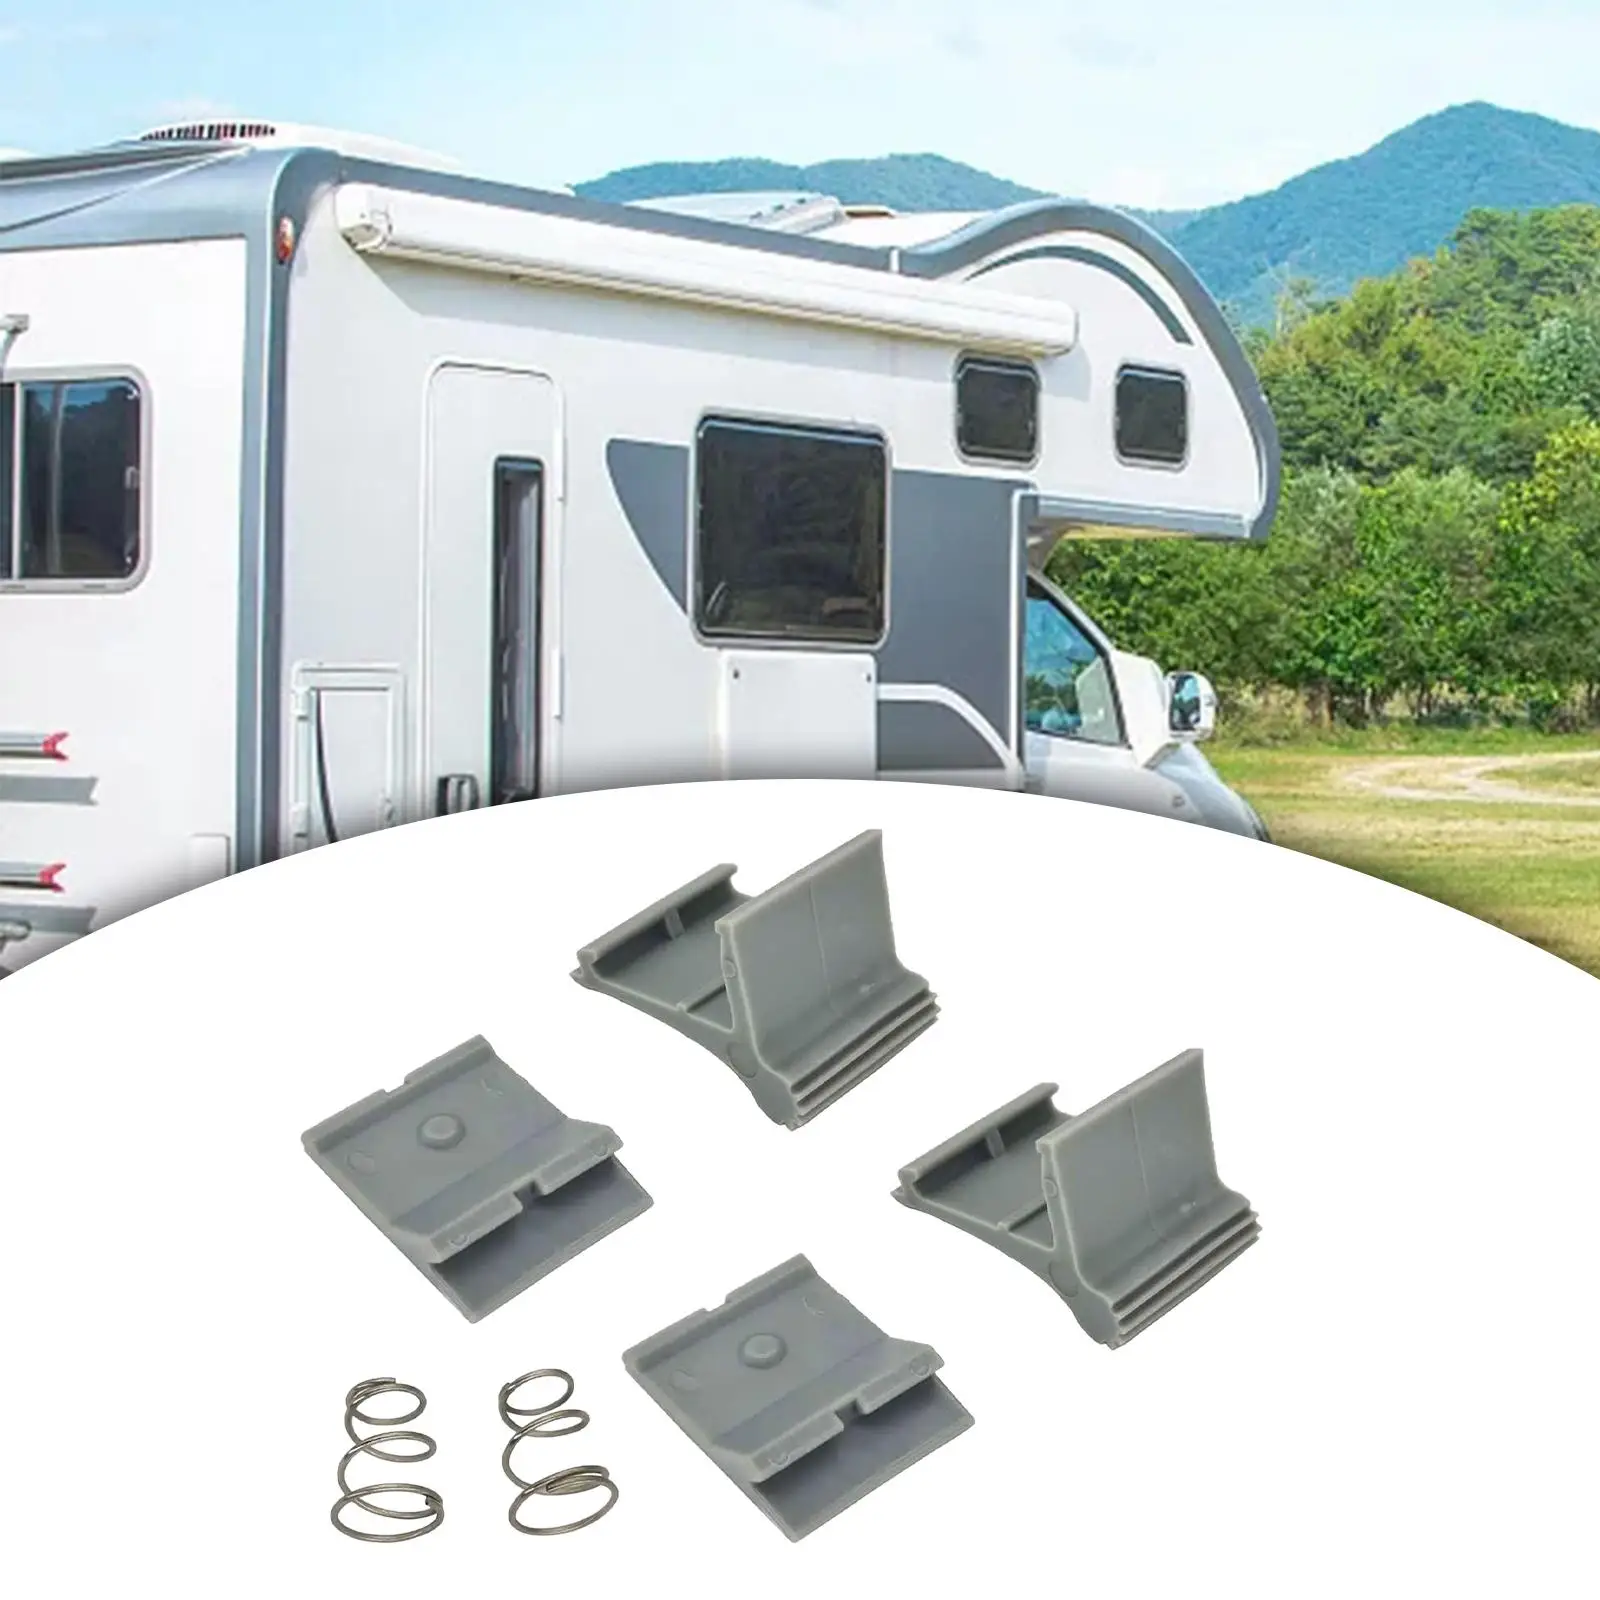 RV Awning Arm Slider Catch Set Spare Parts Durable Assembly Replaces Accessories Easy Installation for Camper Trailer